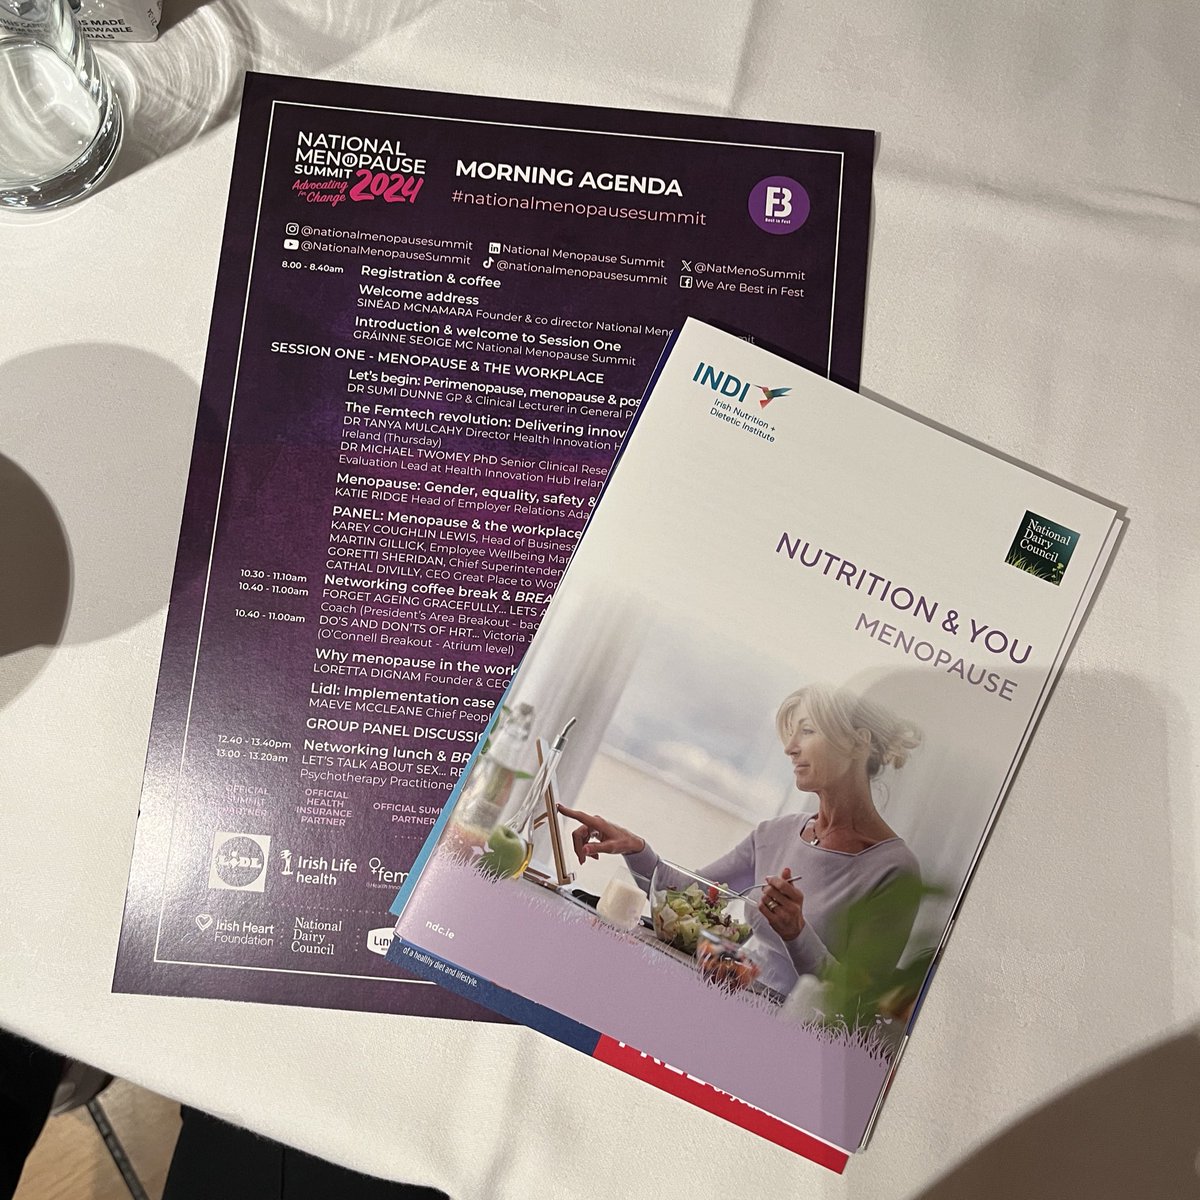 Did you grab a copy of our booklet ‘Nutrition & You: Menopause’ at the #NationalMenopauseSummit? If the answer is no, don’t panic! You can download a copy from our website 👉 bit.ly/menopausebookl… #Event #IrishDairy #NutritiousFromTheGroundUp @NatMenoSummit